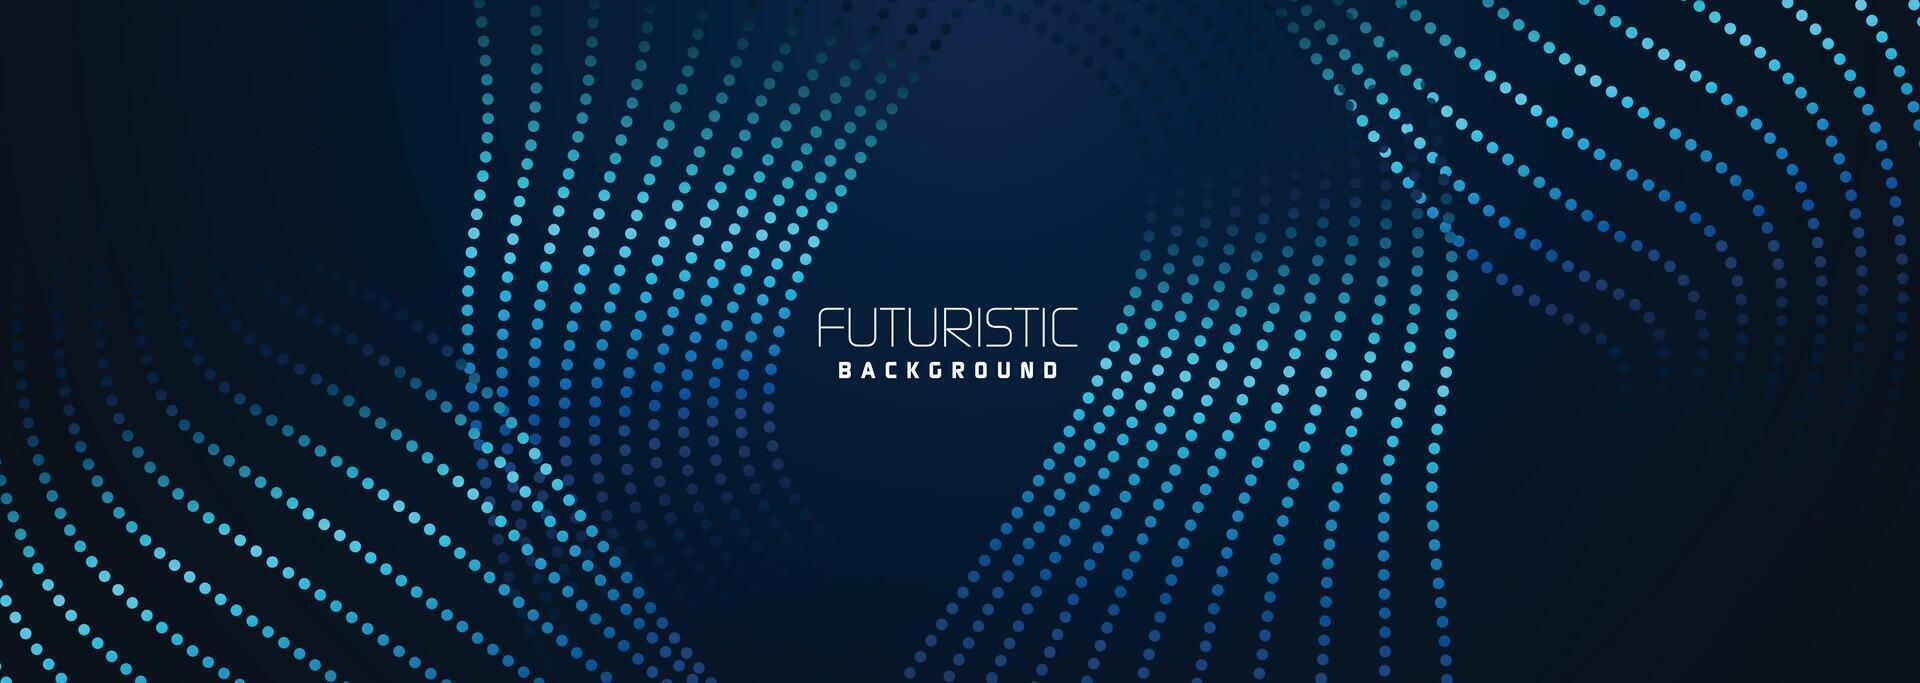 background in futuristic data technology. Halftone waves with dots. flowing dots on a dark blue backdrop. Particles of digital waves in abstraction. Background for an abstract halftone illustration vector